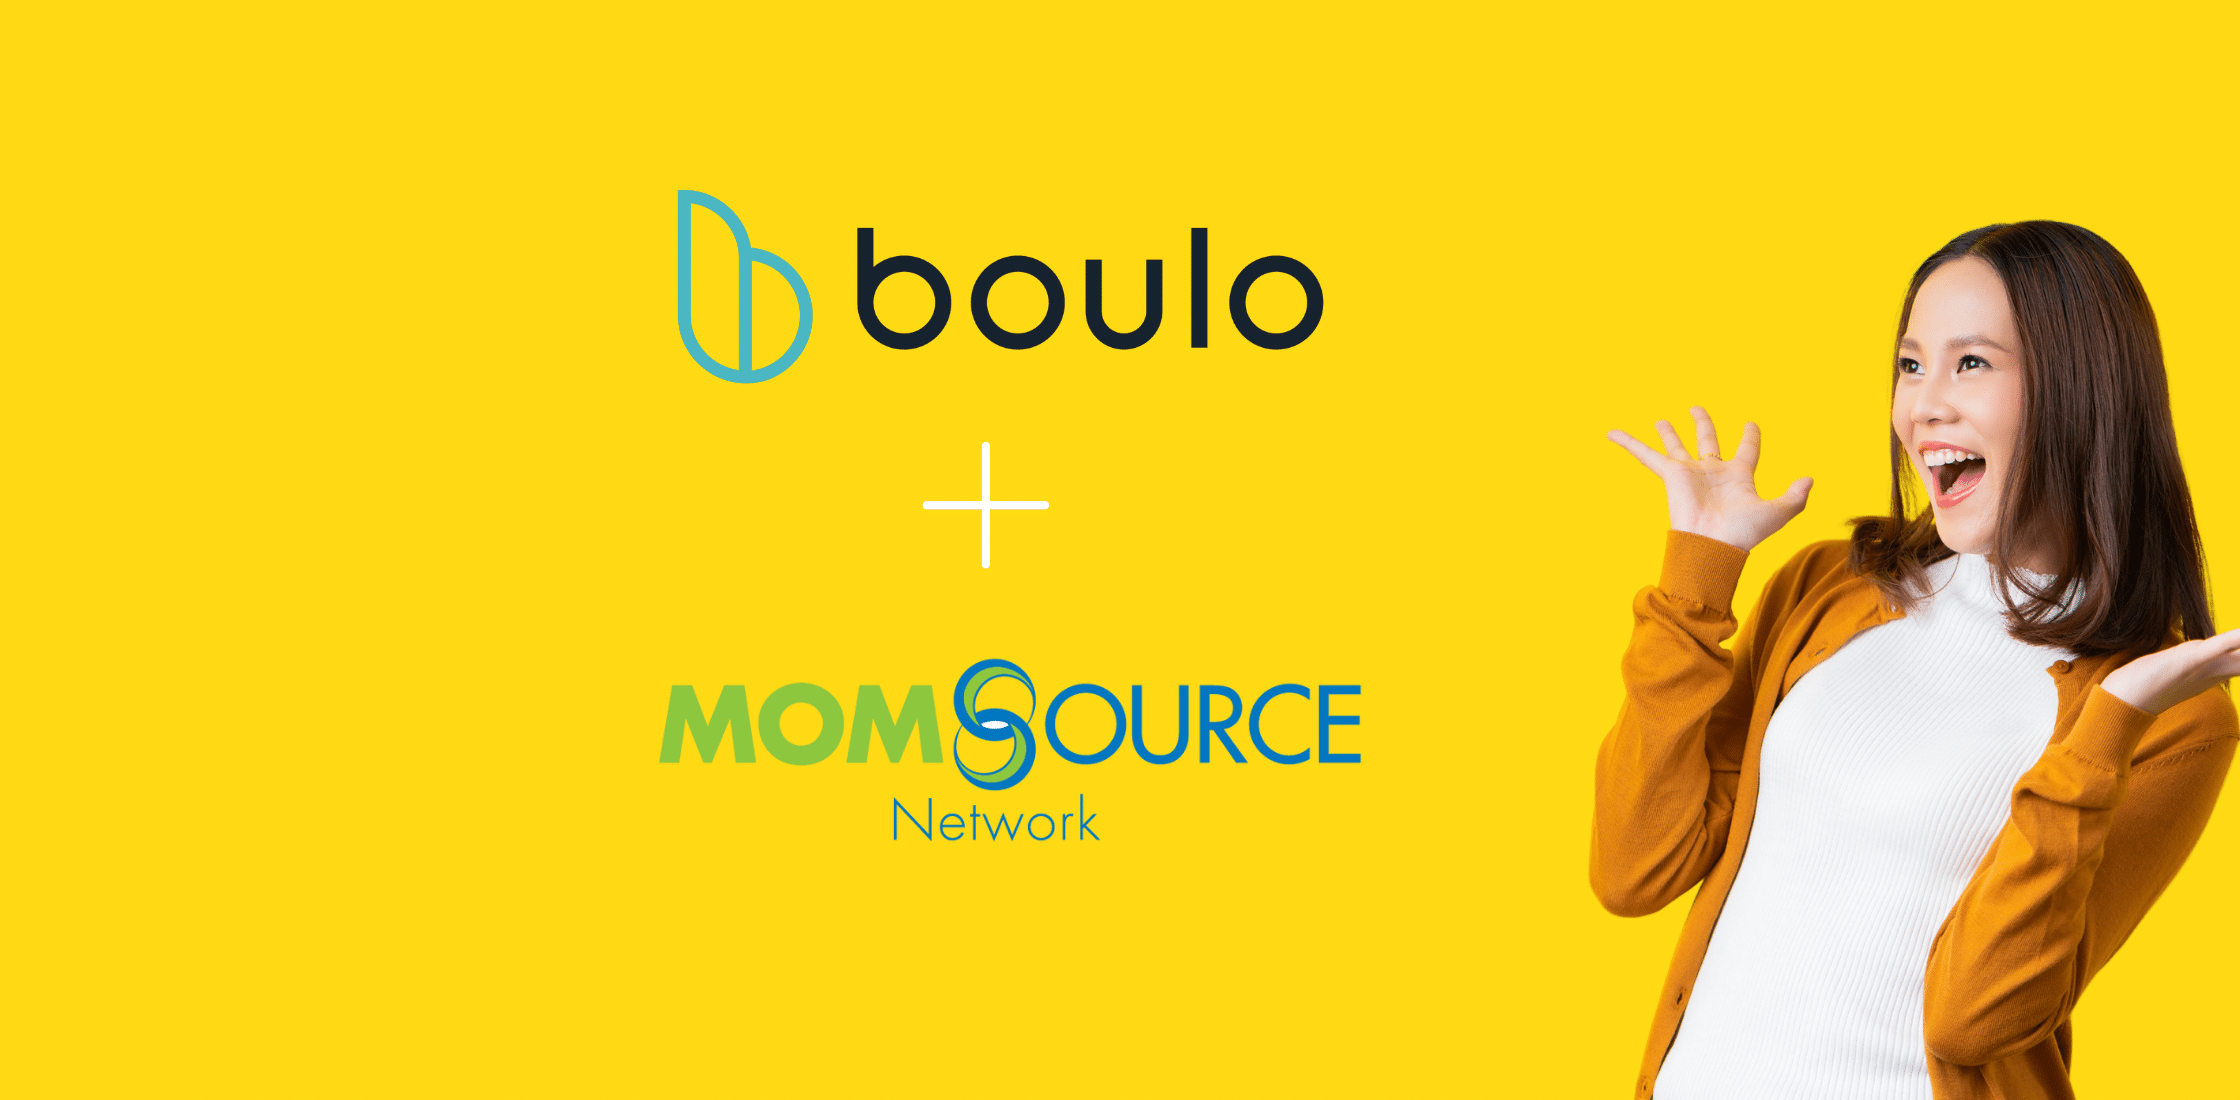 Boulo Solutions Incorporates MomSource Network to increase its ability to match women with flexible jobs and help companies during a tight labor market through rewarding careers